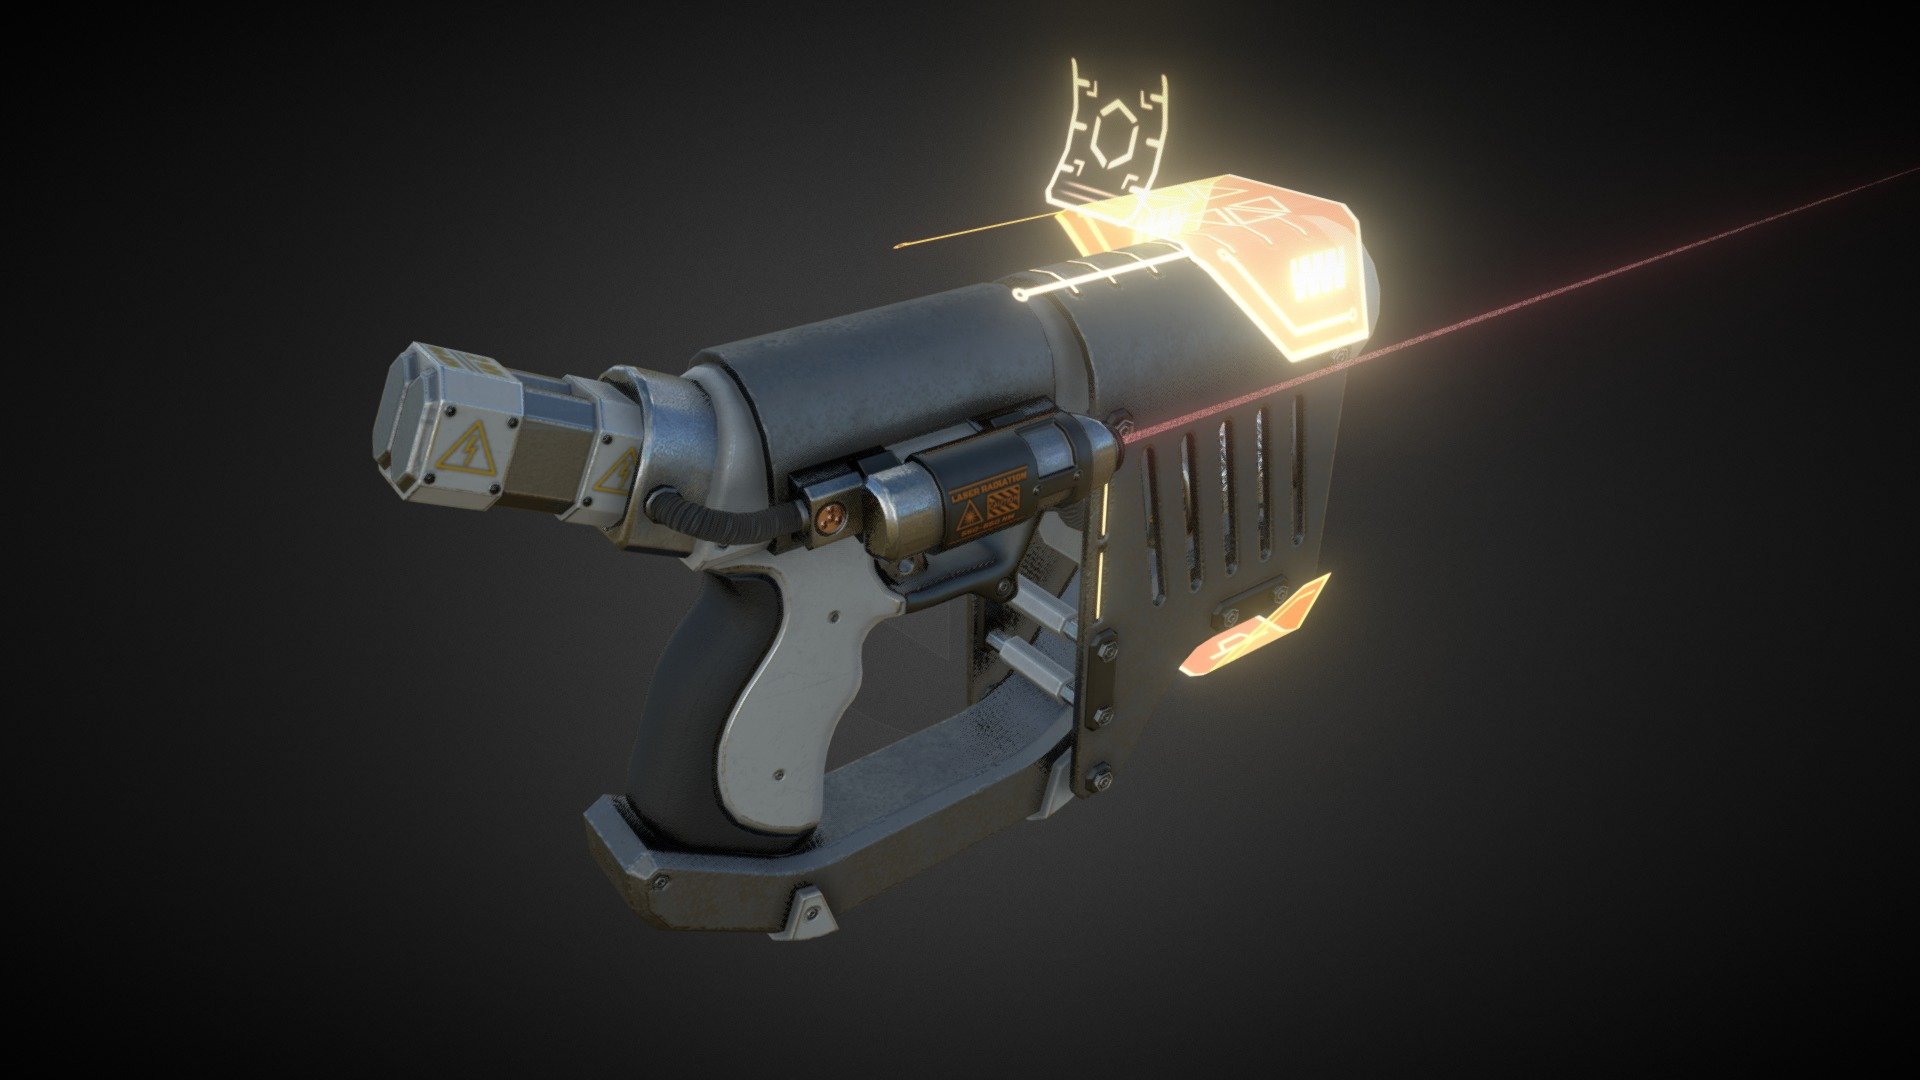 The main EMP pistol for VR Sealegs by 3lb Games. Shown here in the fully upgraded configuration (high capacity battery, insulated capacitor and laser sight). Made with Blender and Substance Painter 3d model